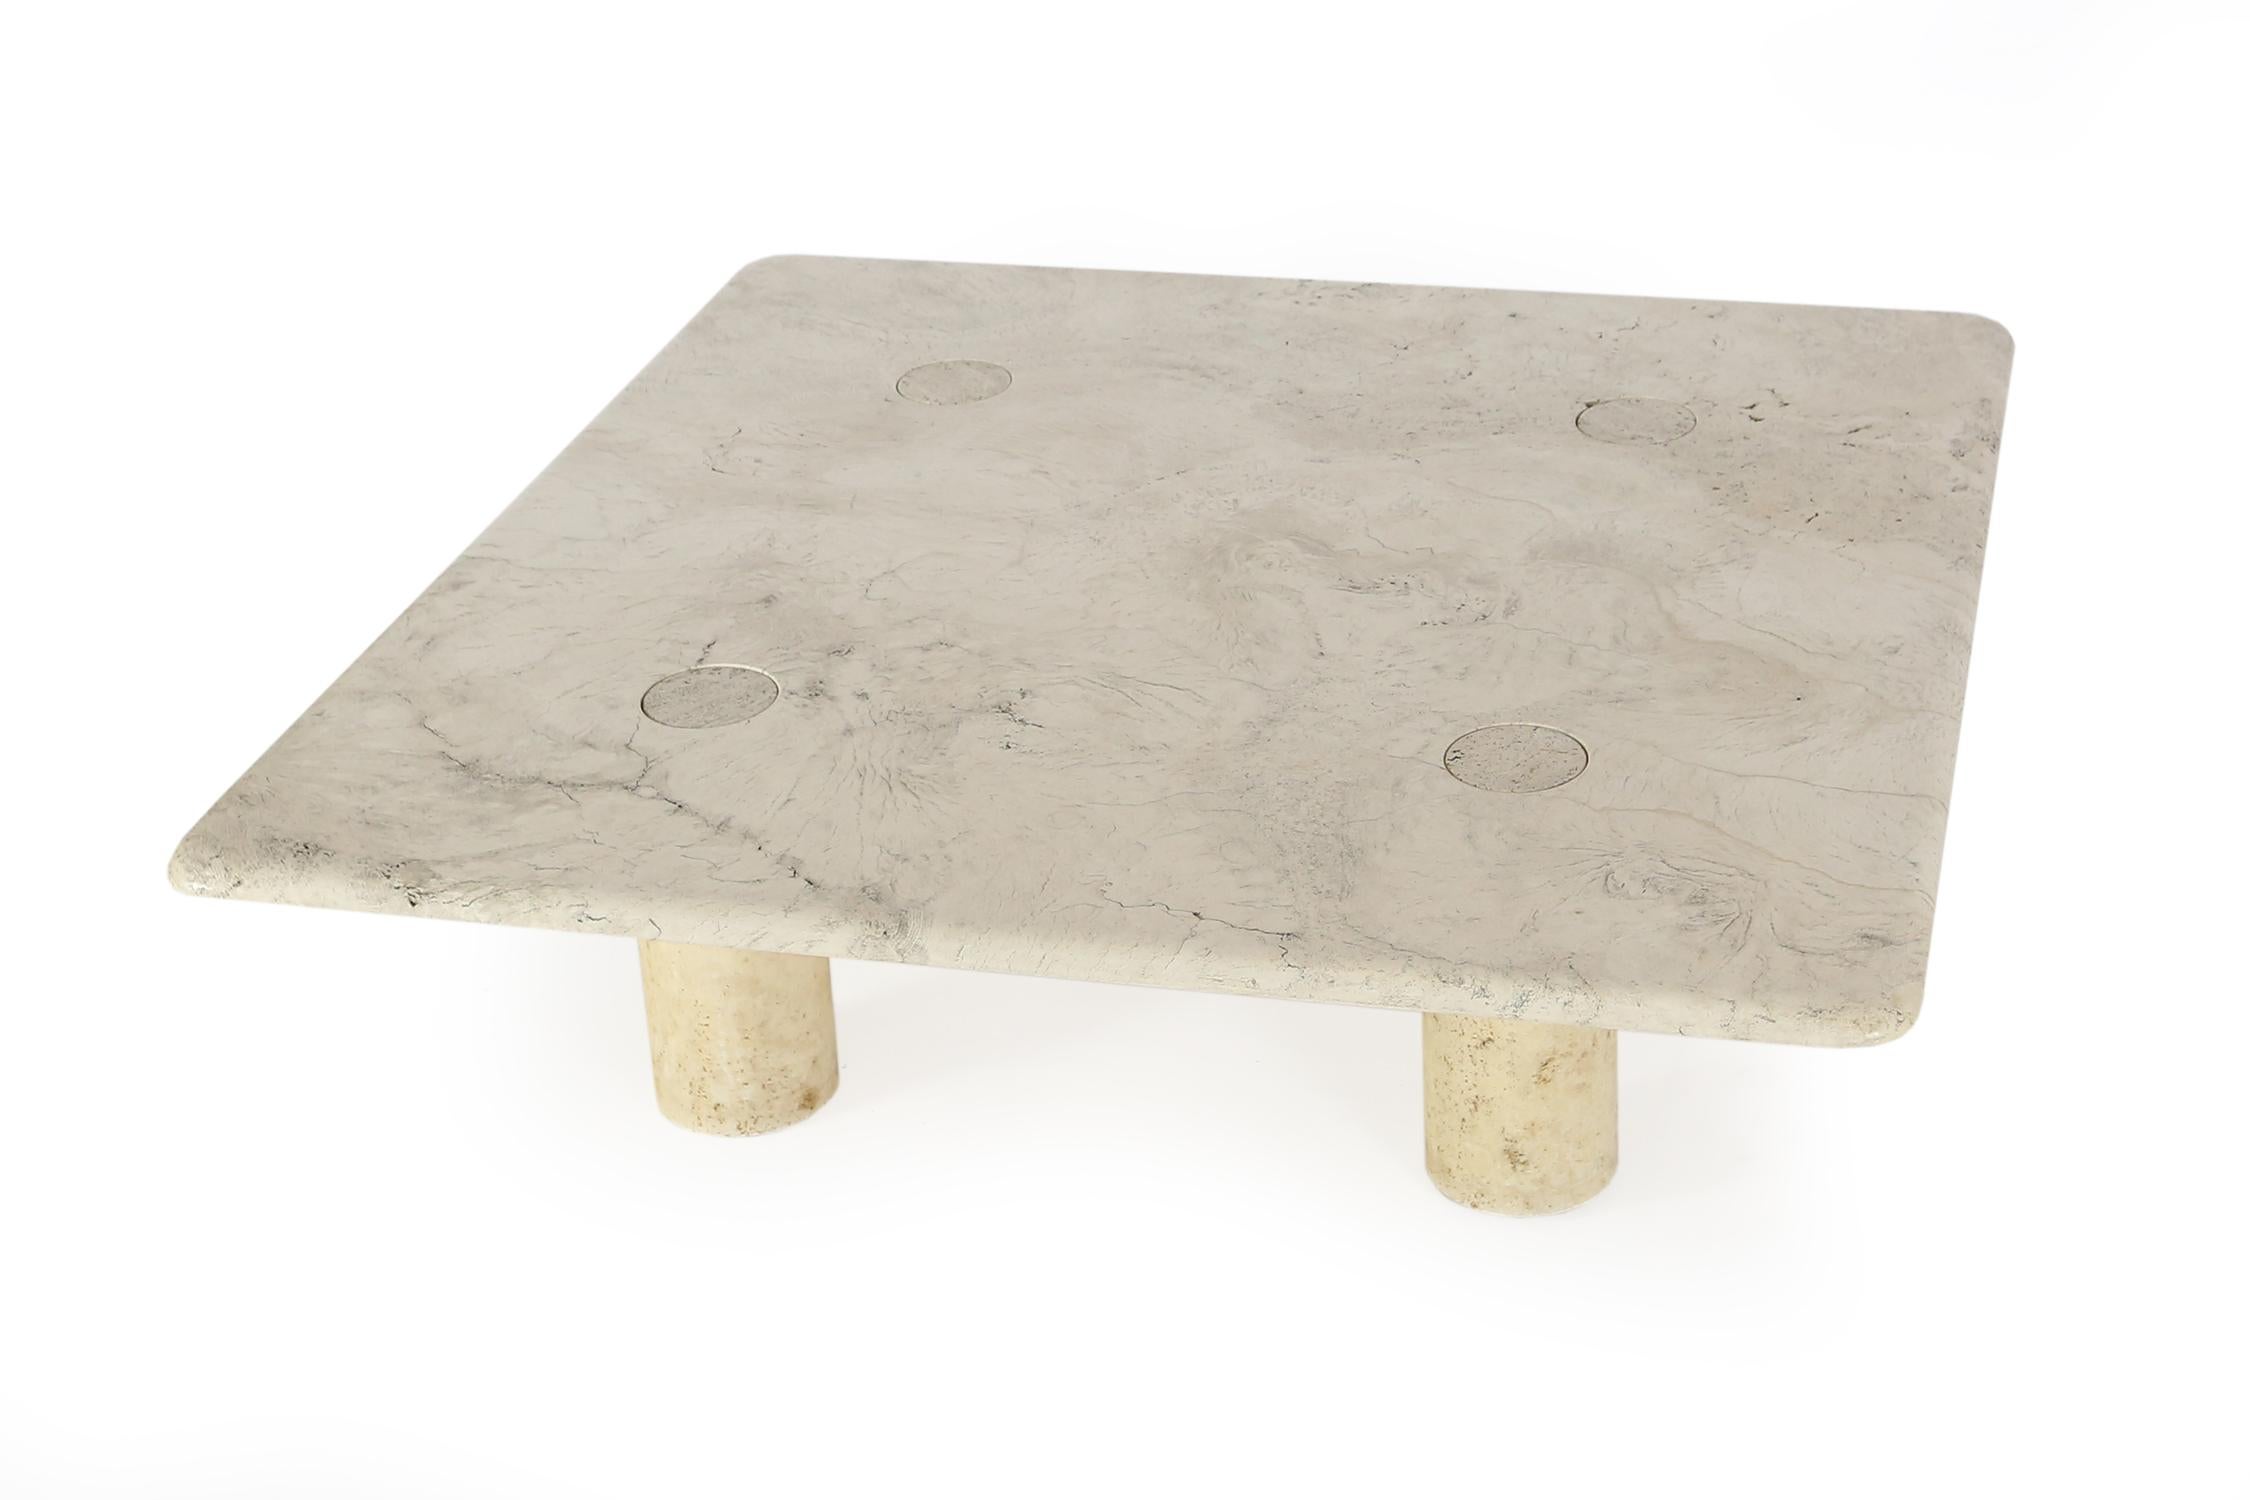 Travertine coffee or cocktail table with interlocking travertine legs by Angelo Mangiarotti for Up&Up Italy, 1970s.